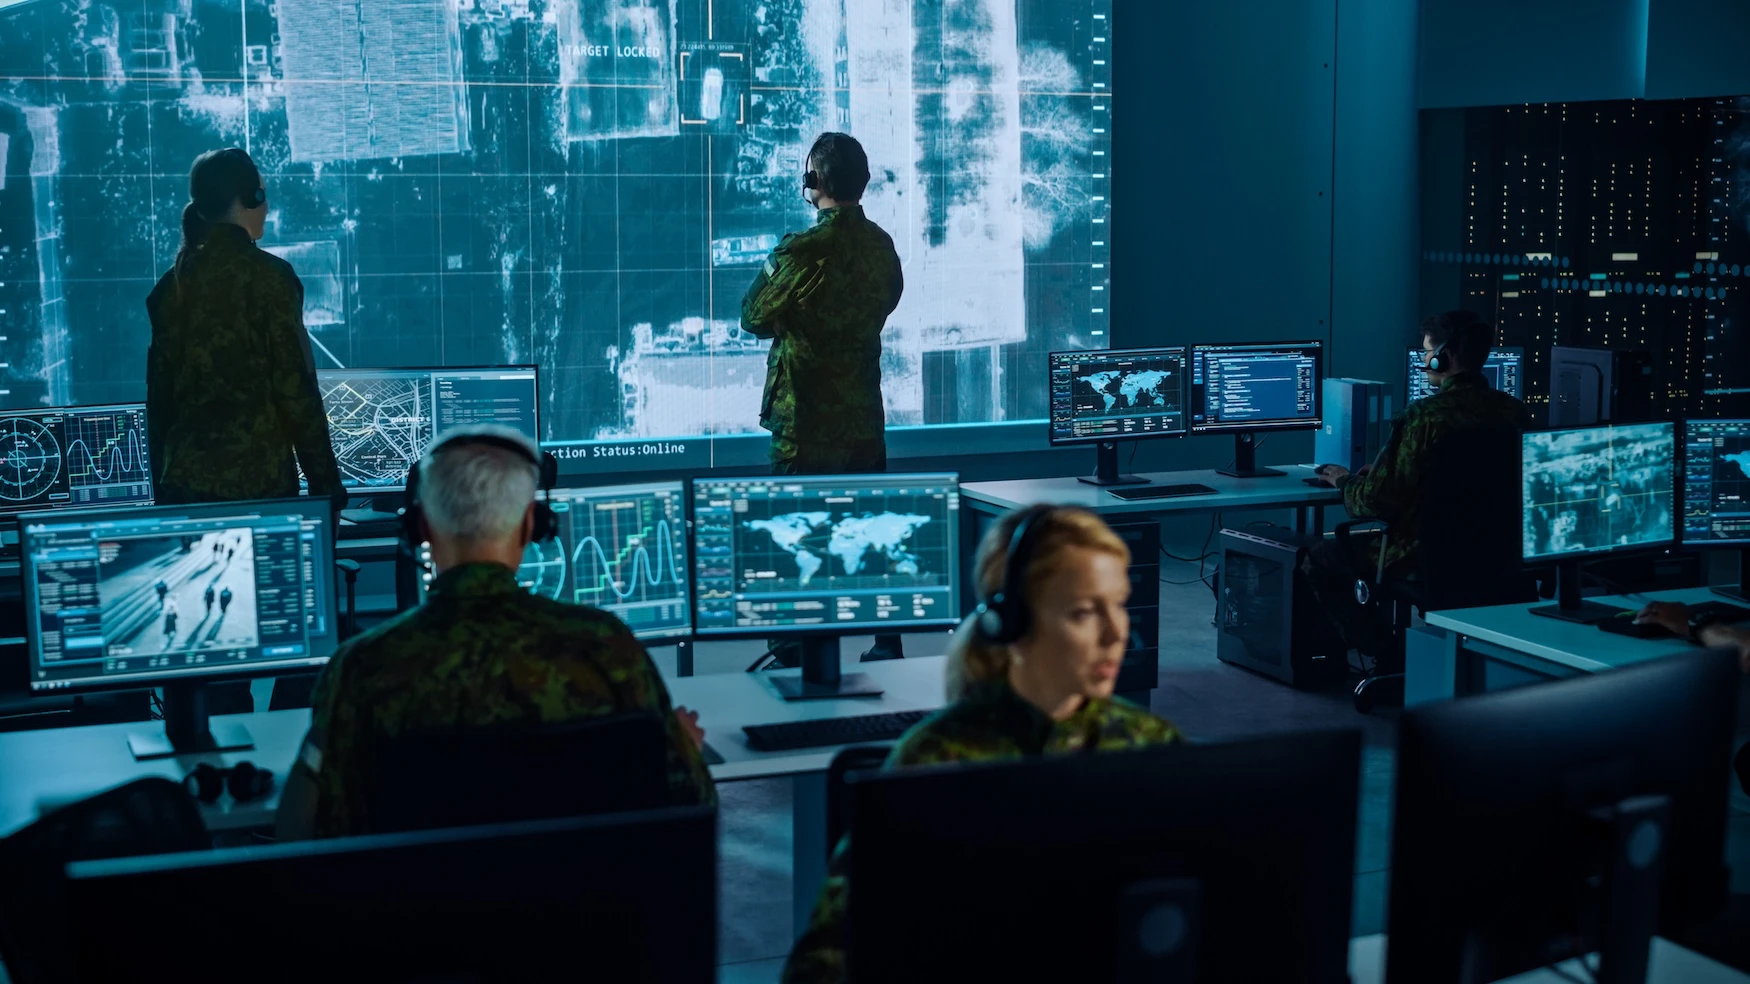 Military Intelligence professionals working in a computer room